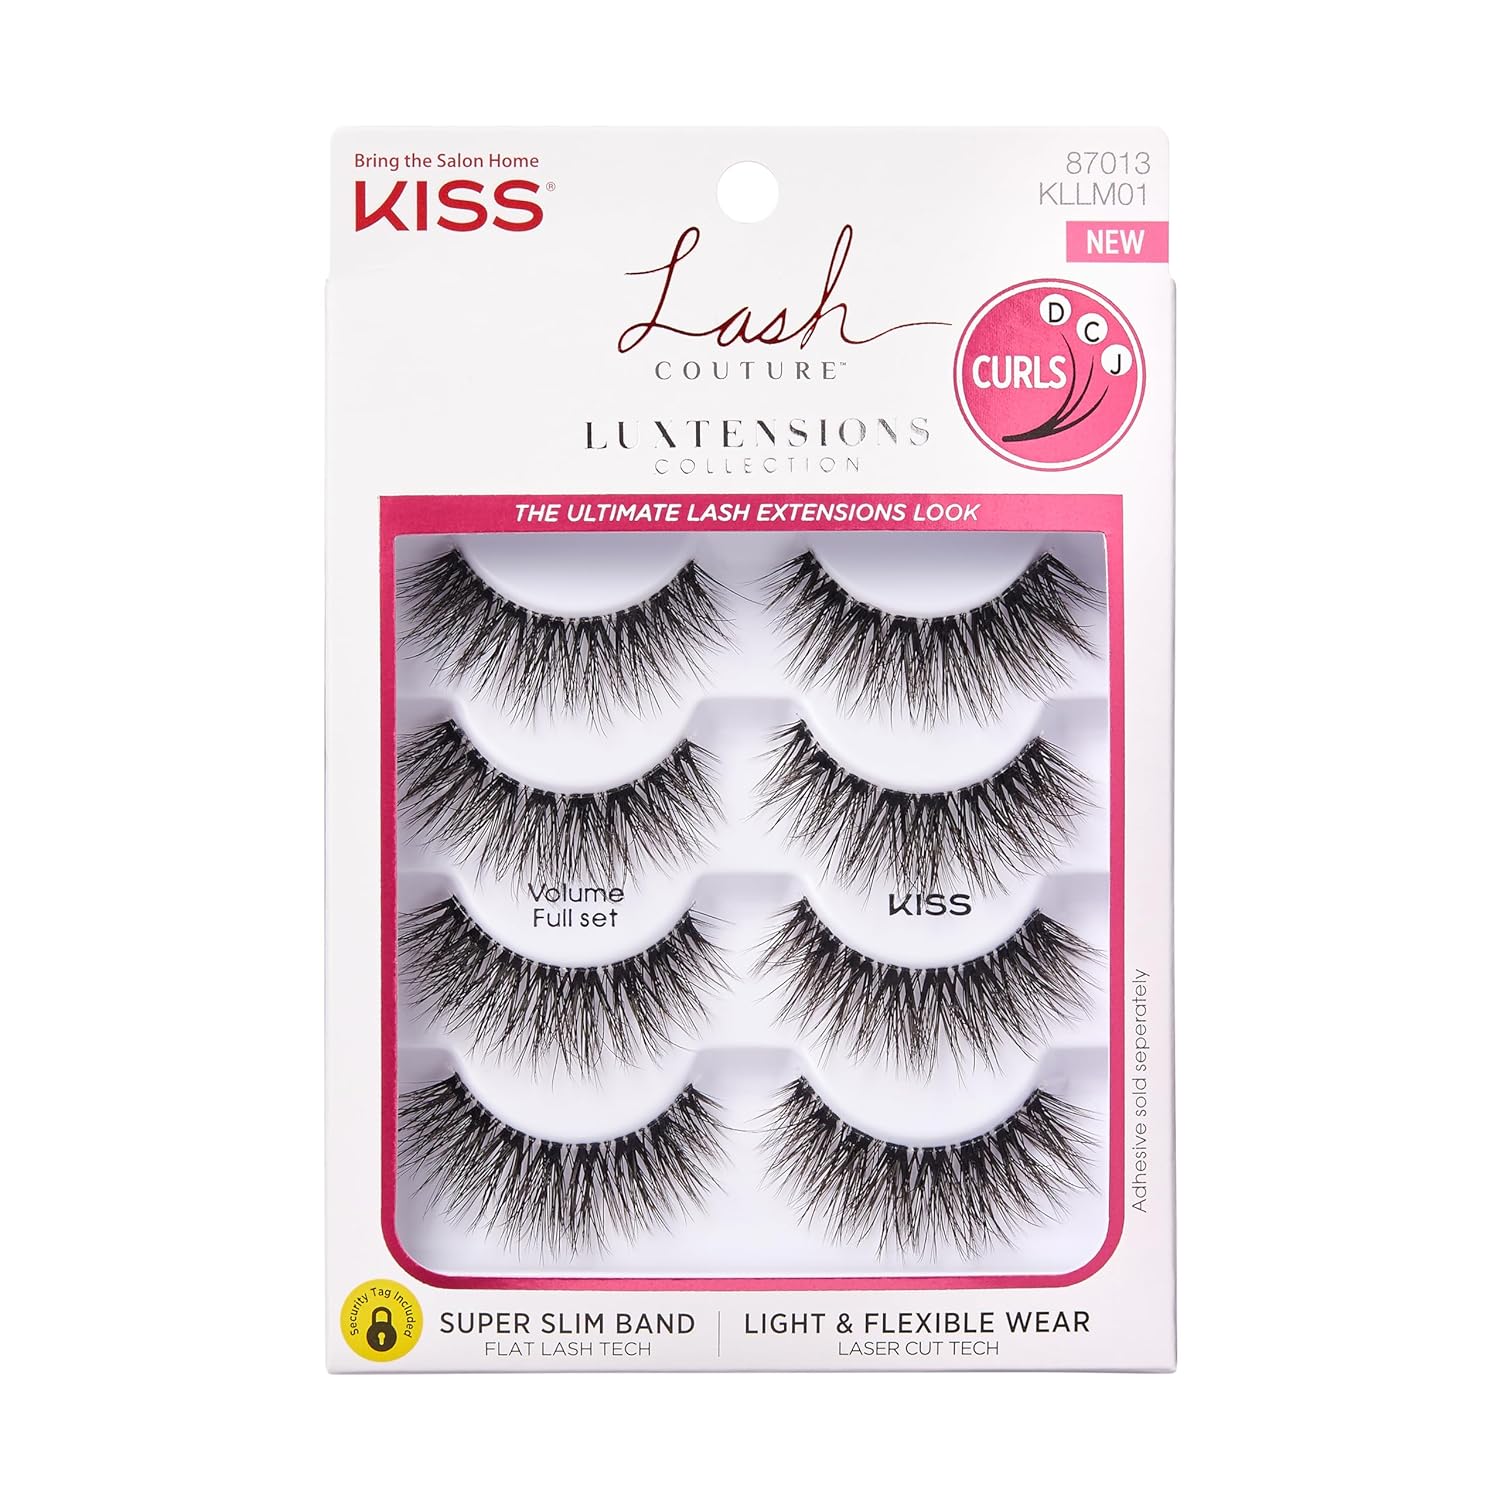 KISS Lash Couture Luxtension False Eyelashes, Royal Silk, 10 mm, Includes 1 Pair Of Lash, Contact Lens Friendly, Easy to Apply, Reusable Strip Lashes